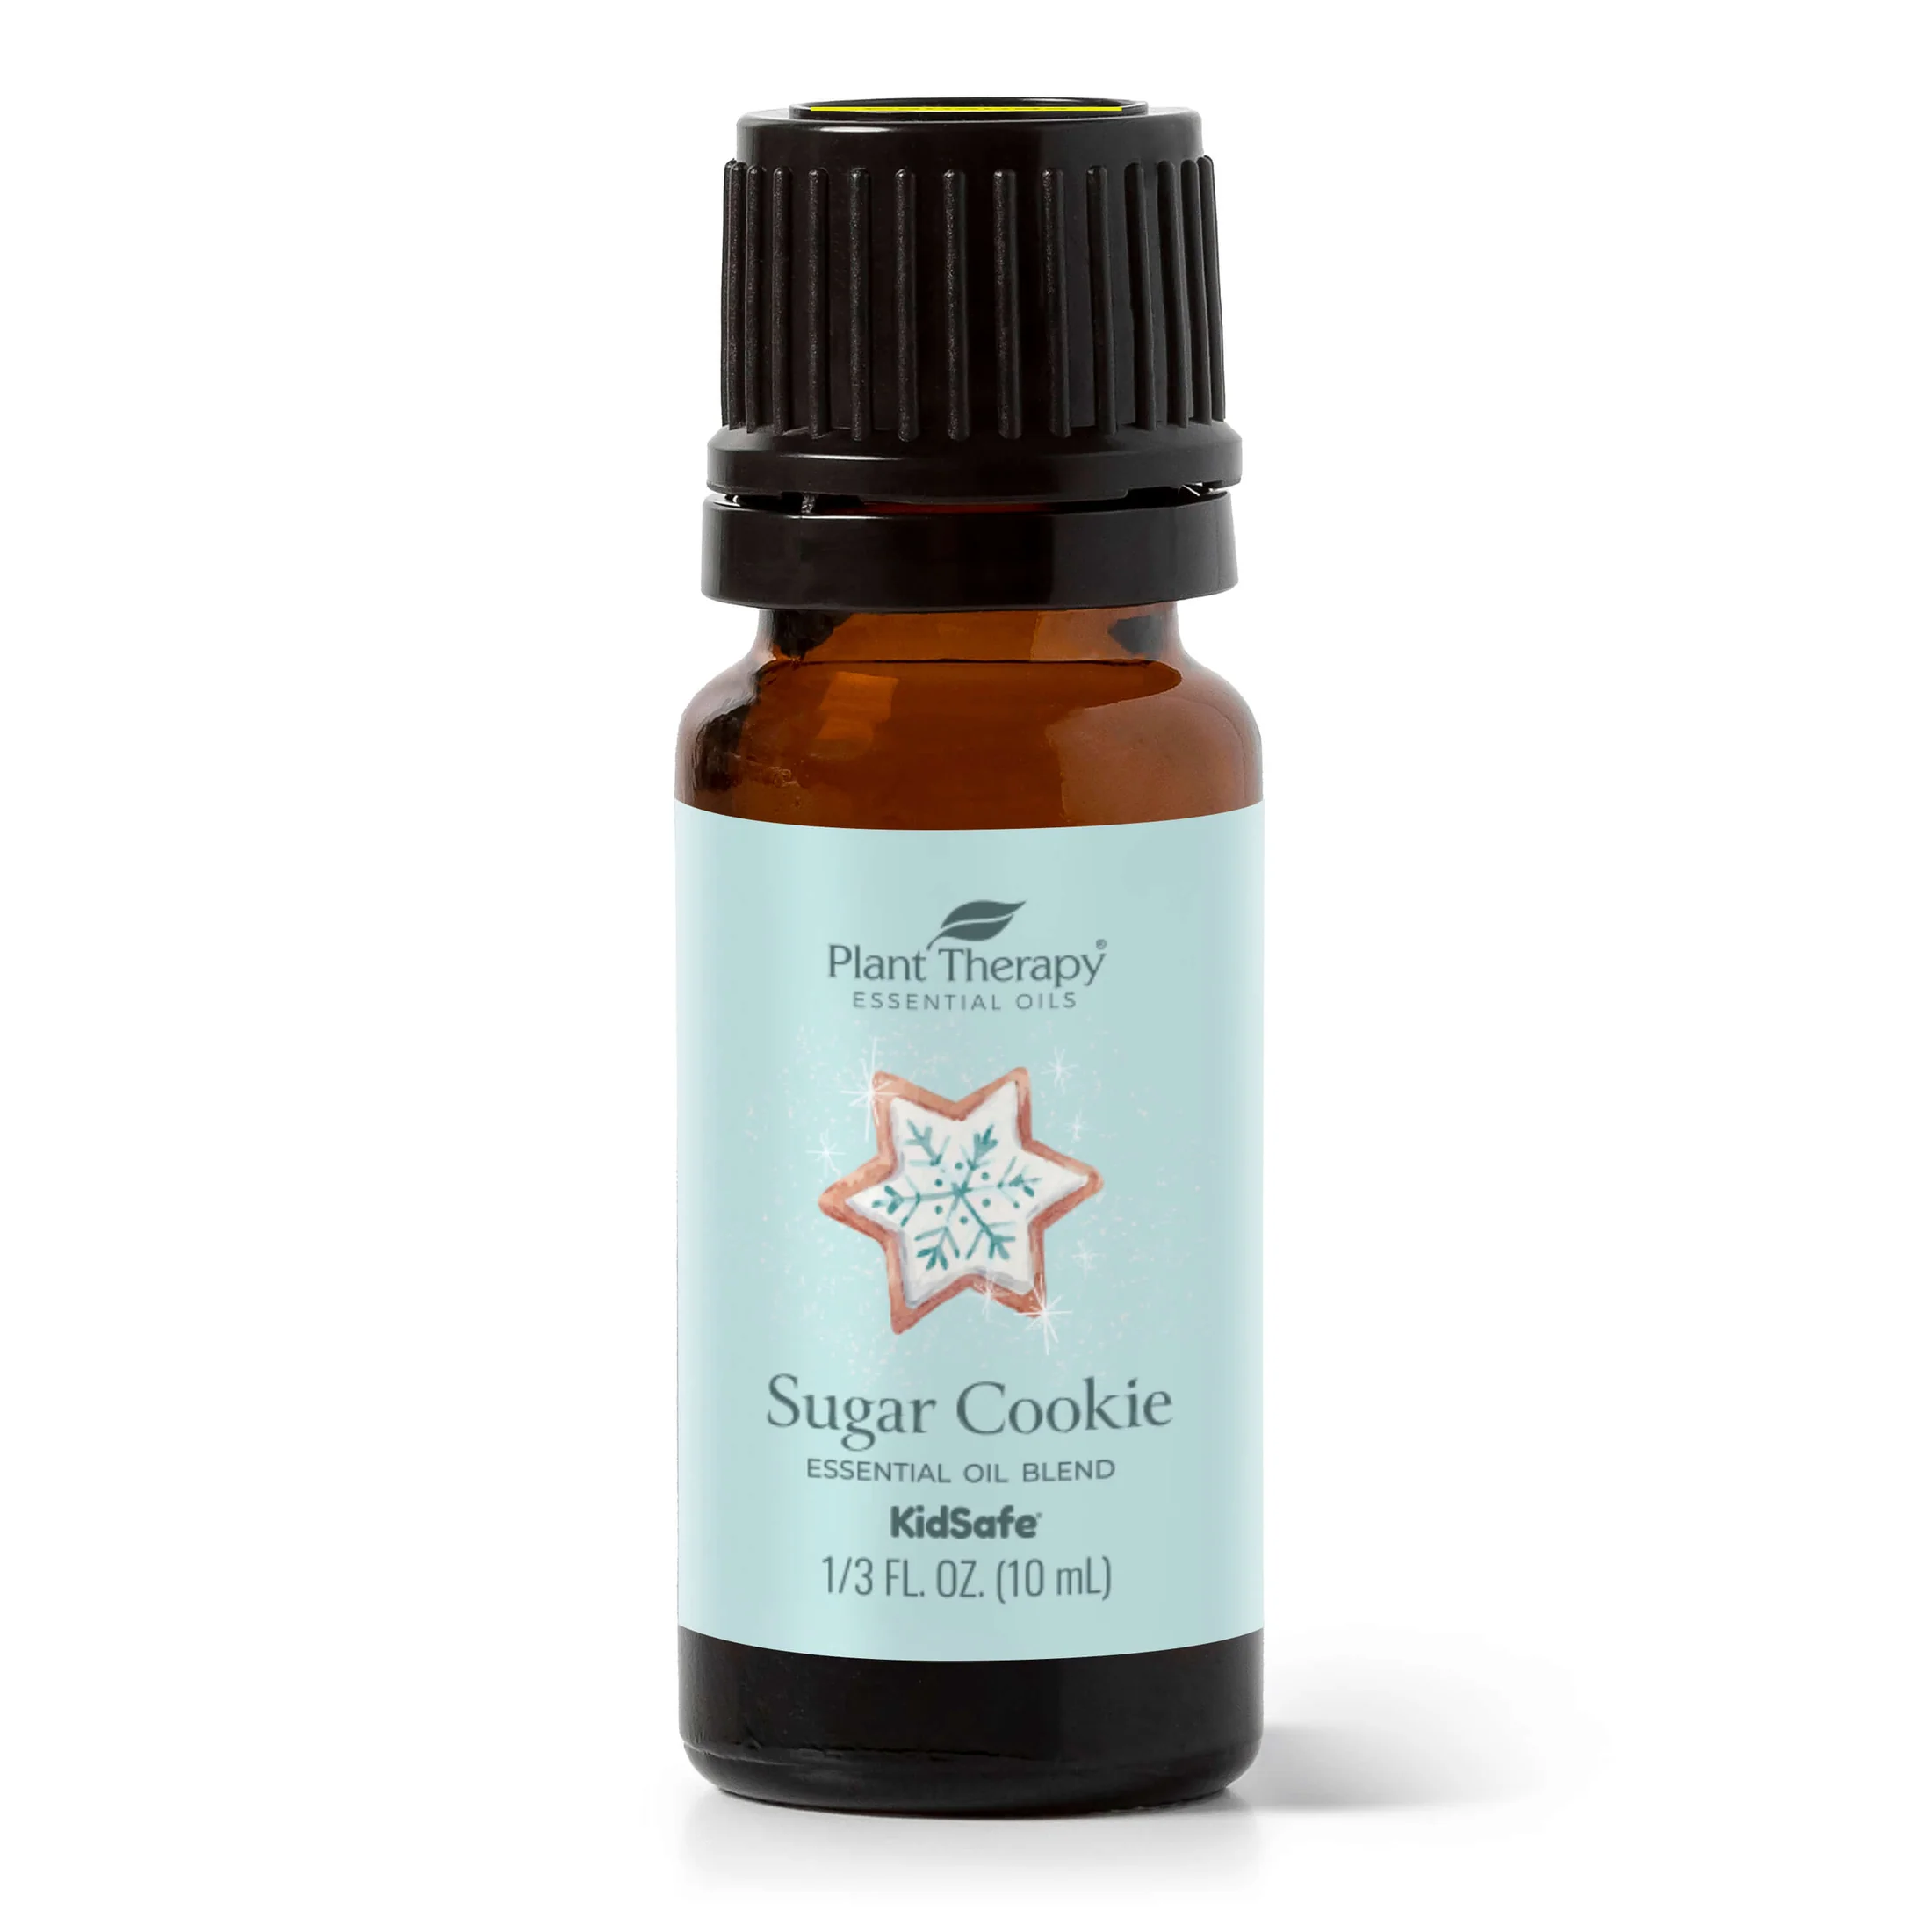 Chocolate Truffle Essential Oil Blend – Plant Therapy